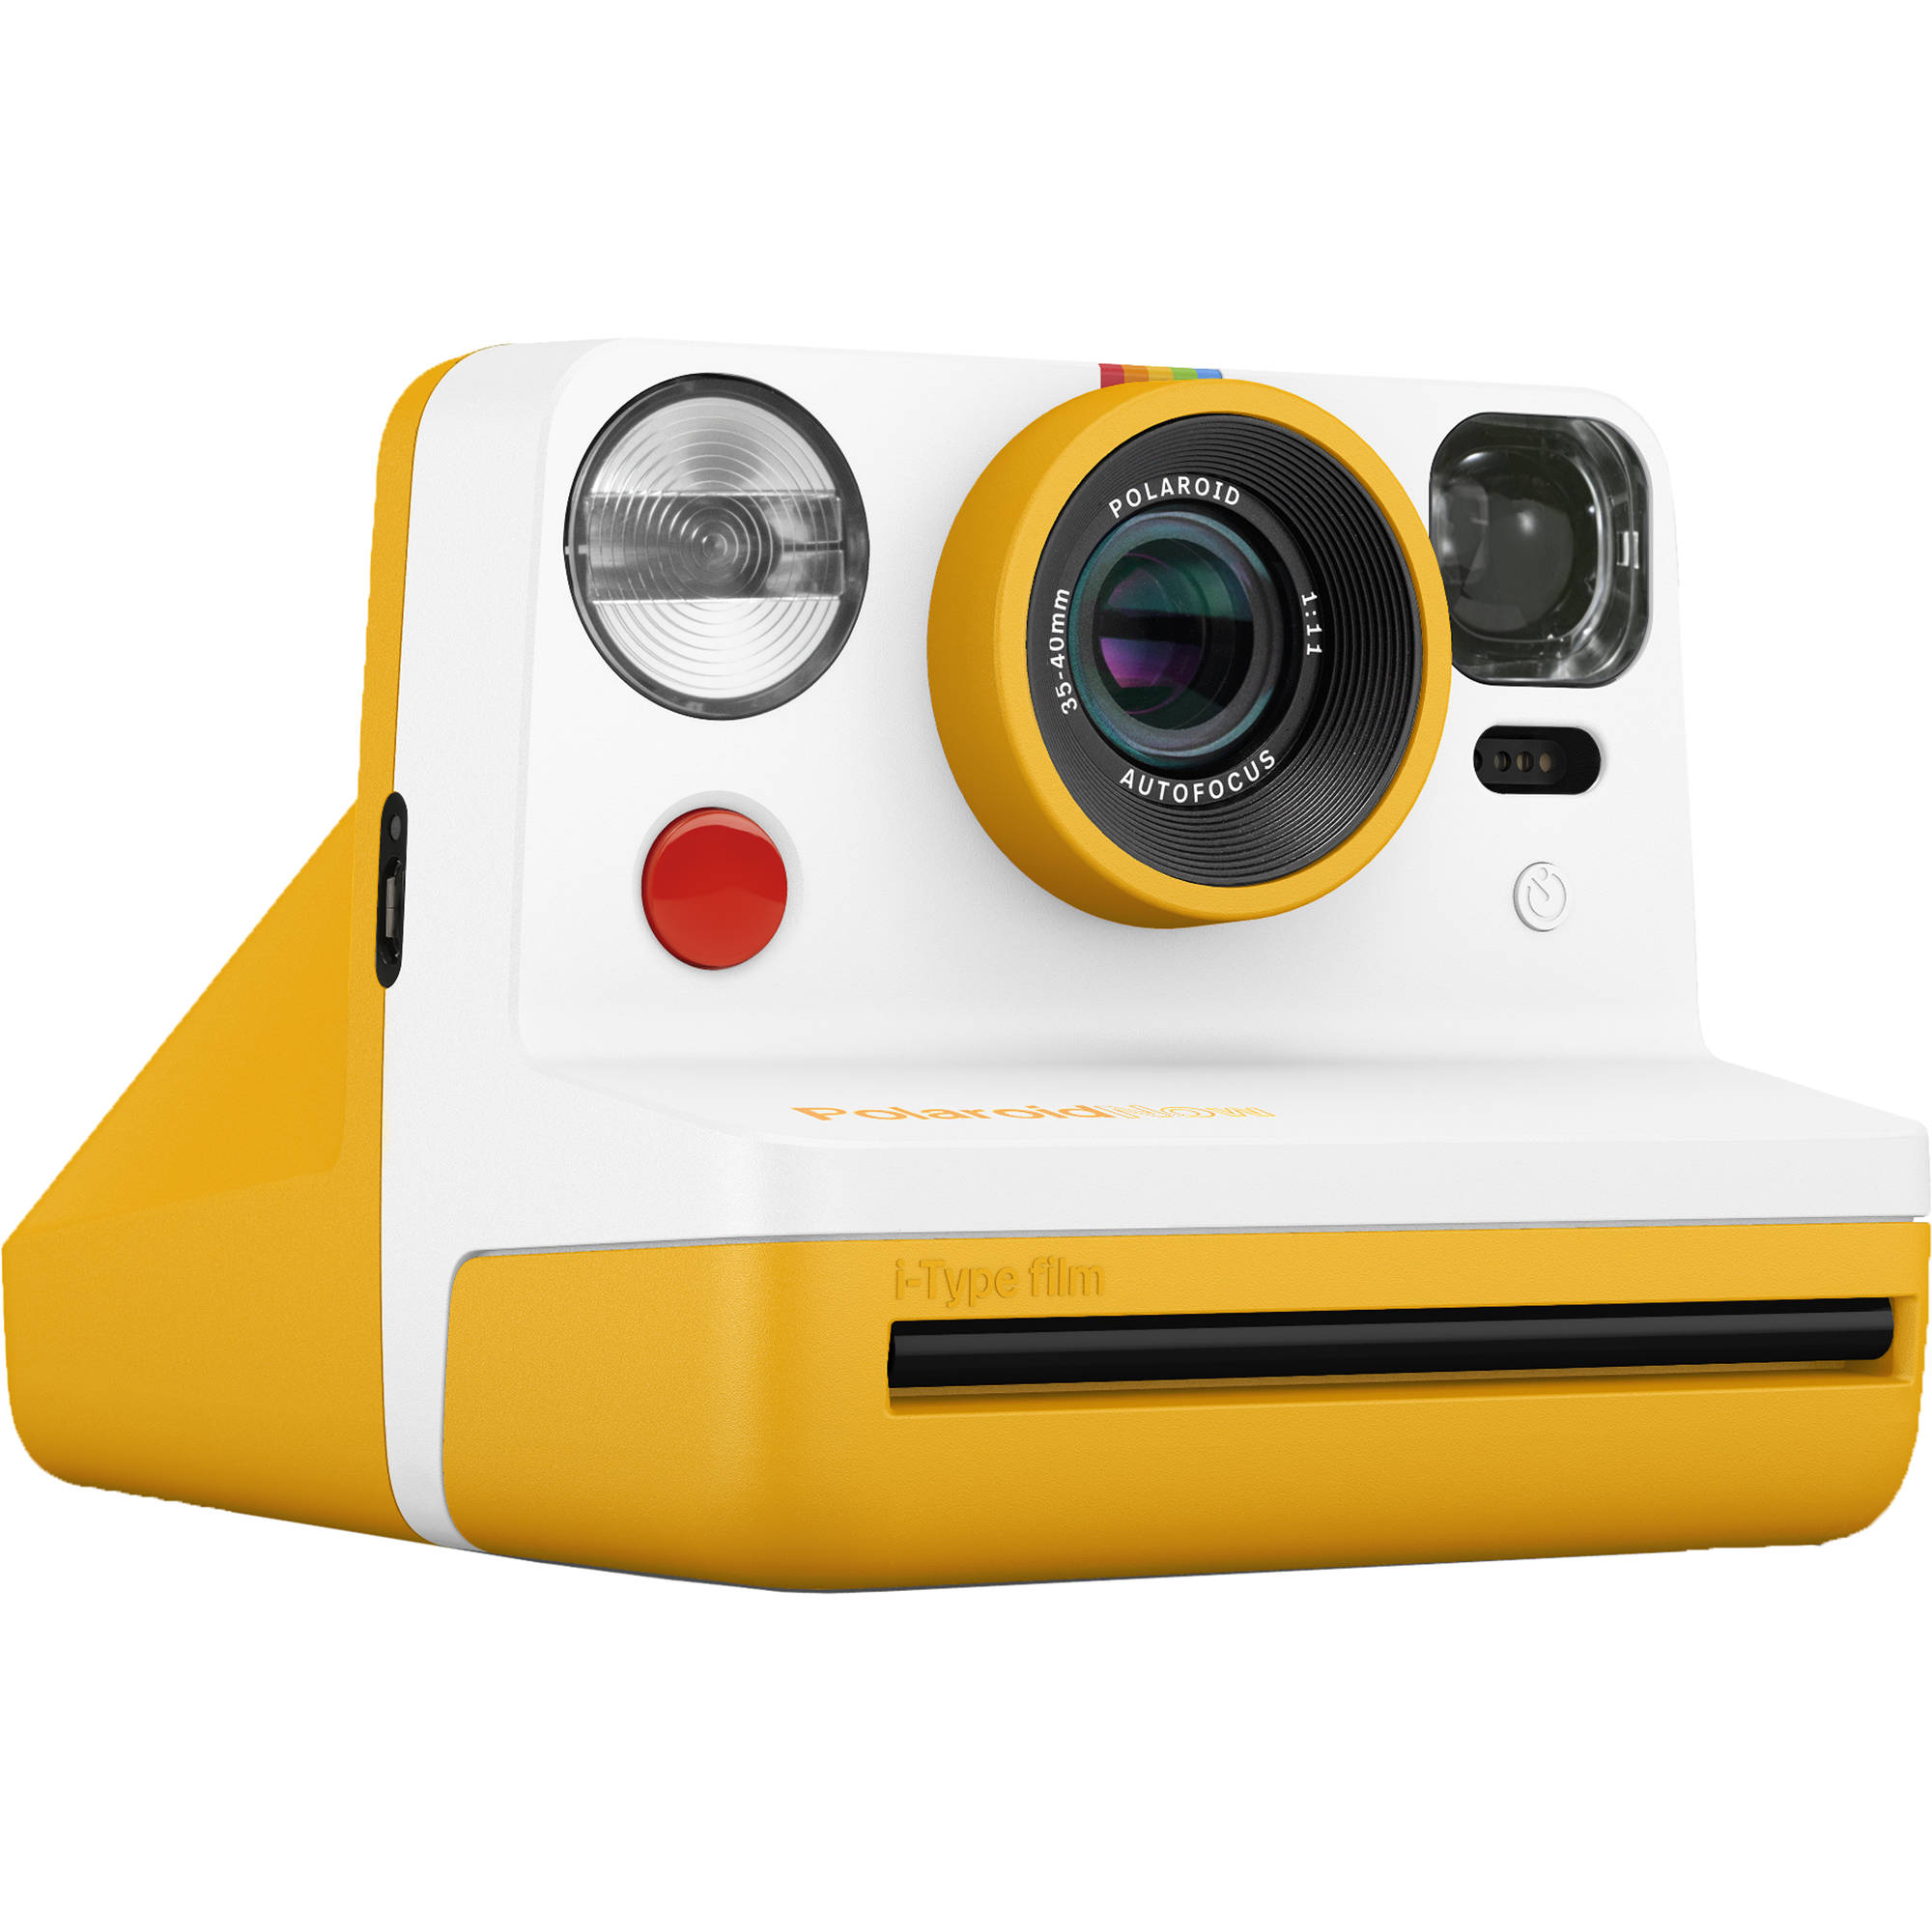 Polaroid Now Instant Film Camera Yellow 9031 B H Photo Video Yellow polaroid camera free png and psd. polaroid now instant film camera yellow